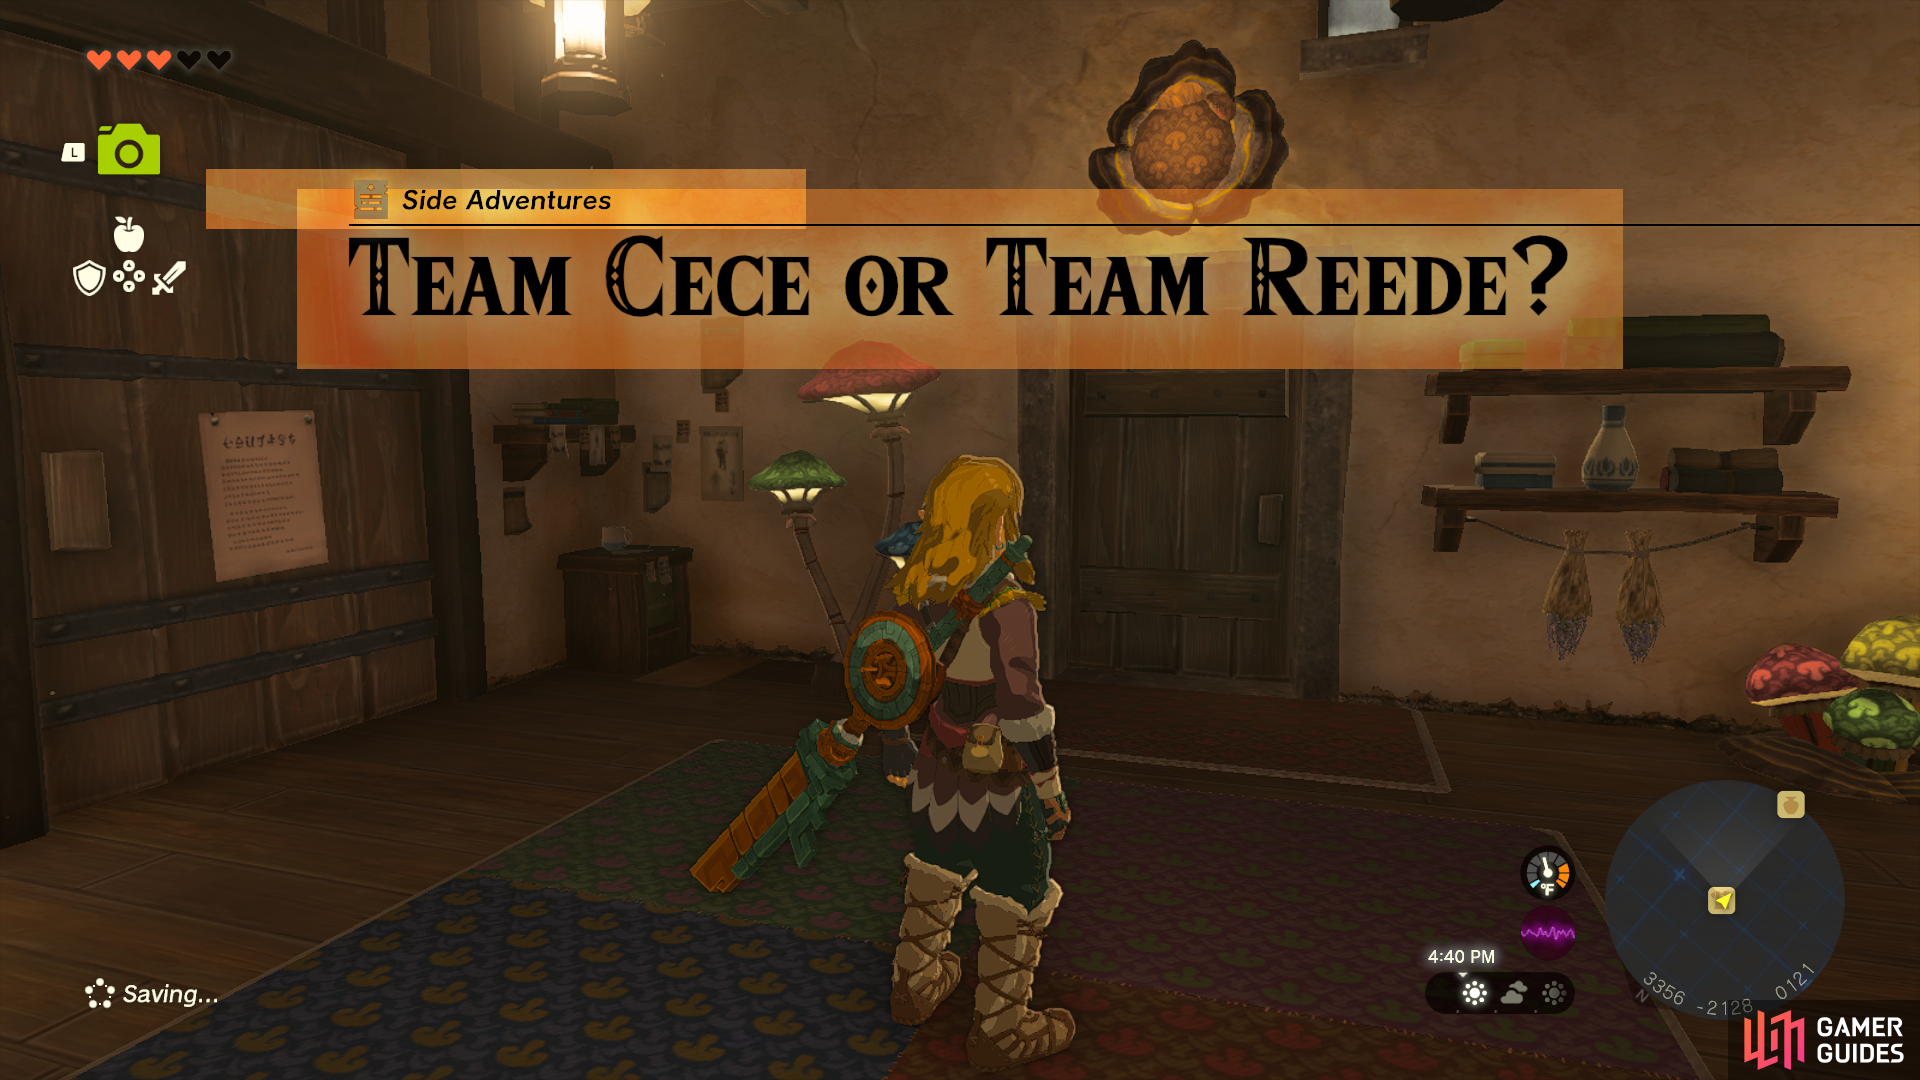 Speak with Cece in the clothing shop to start Team Cece or Team Reede.